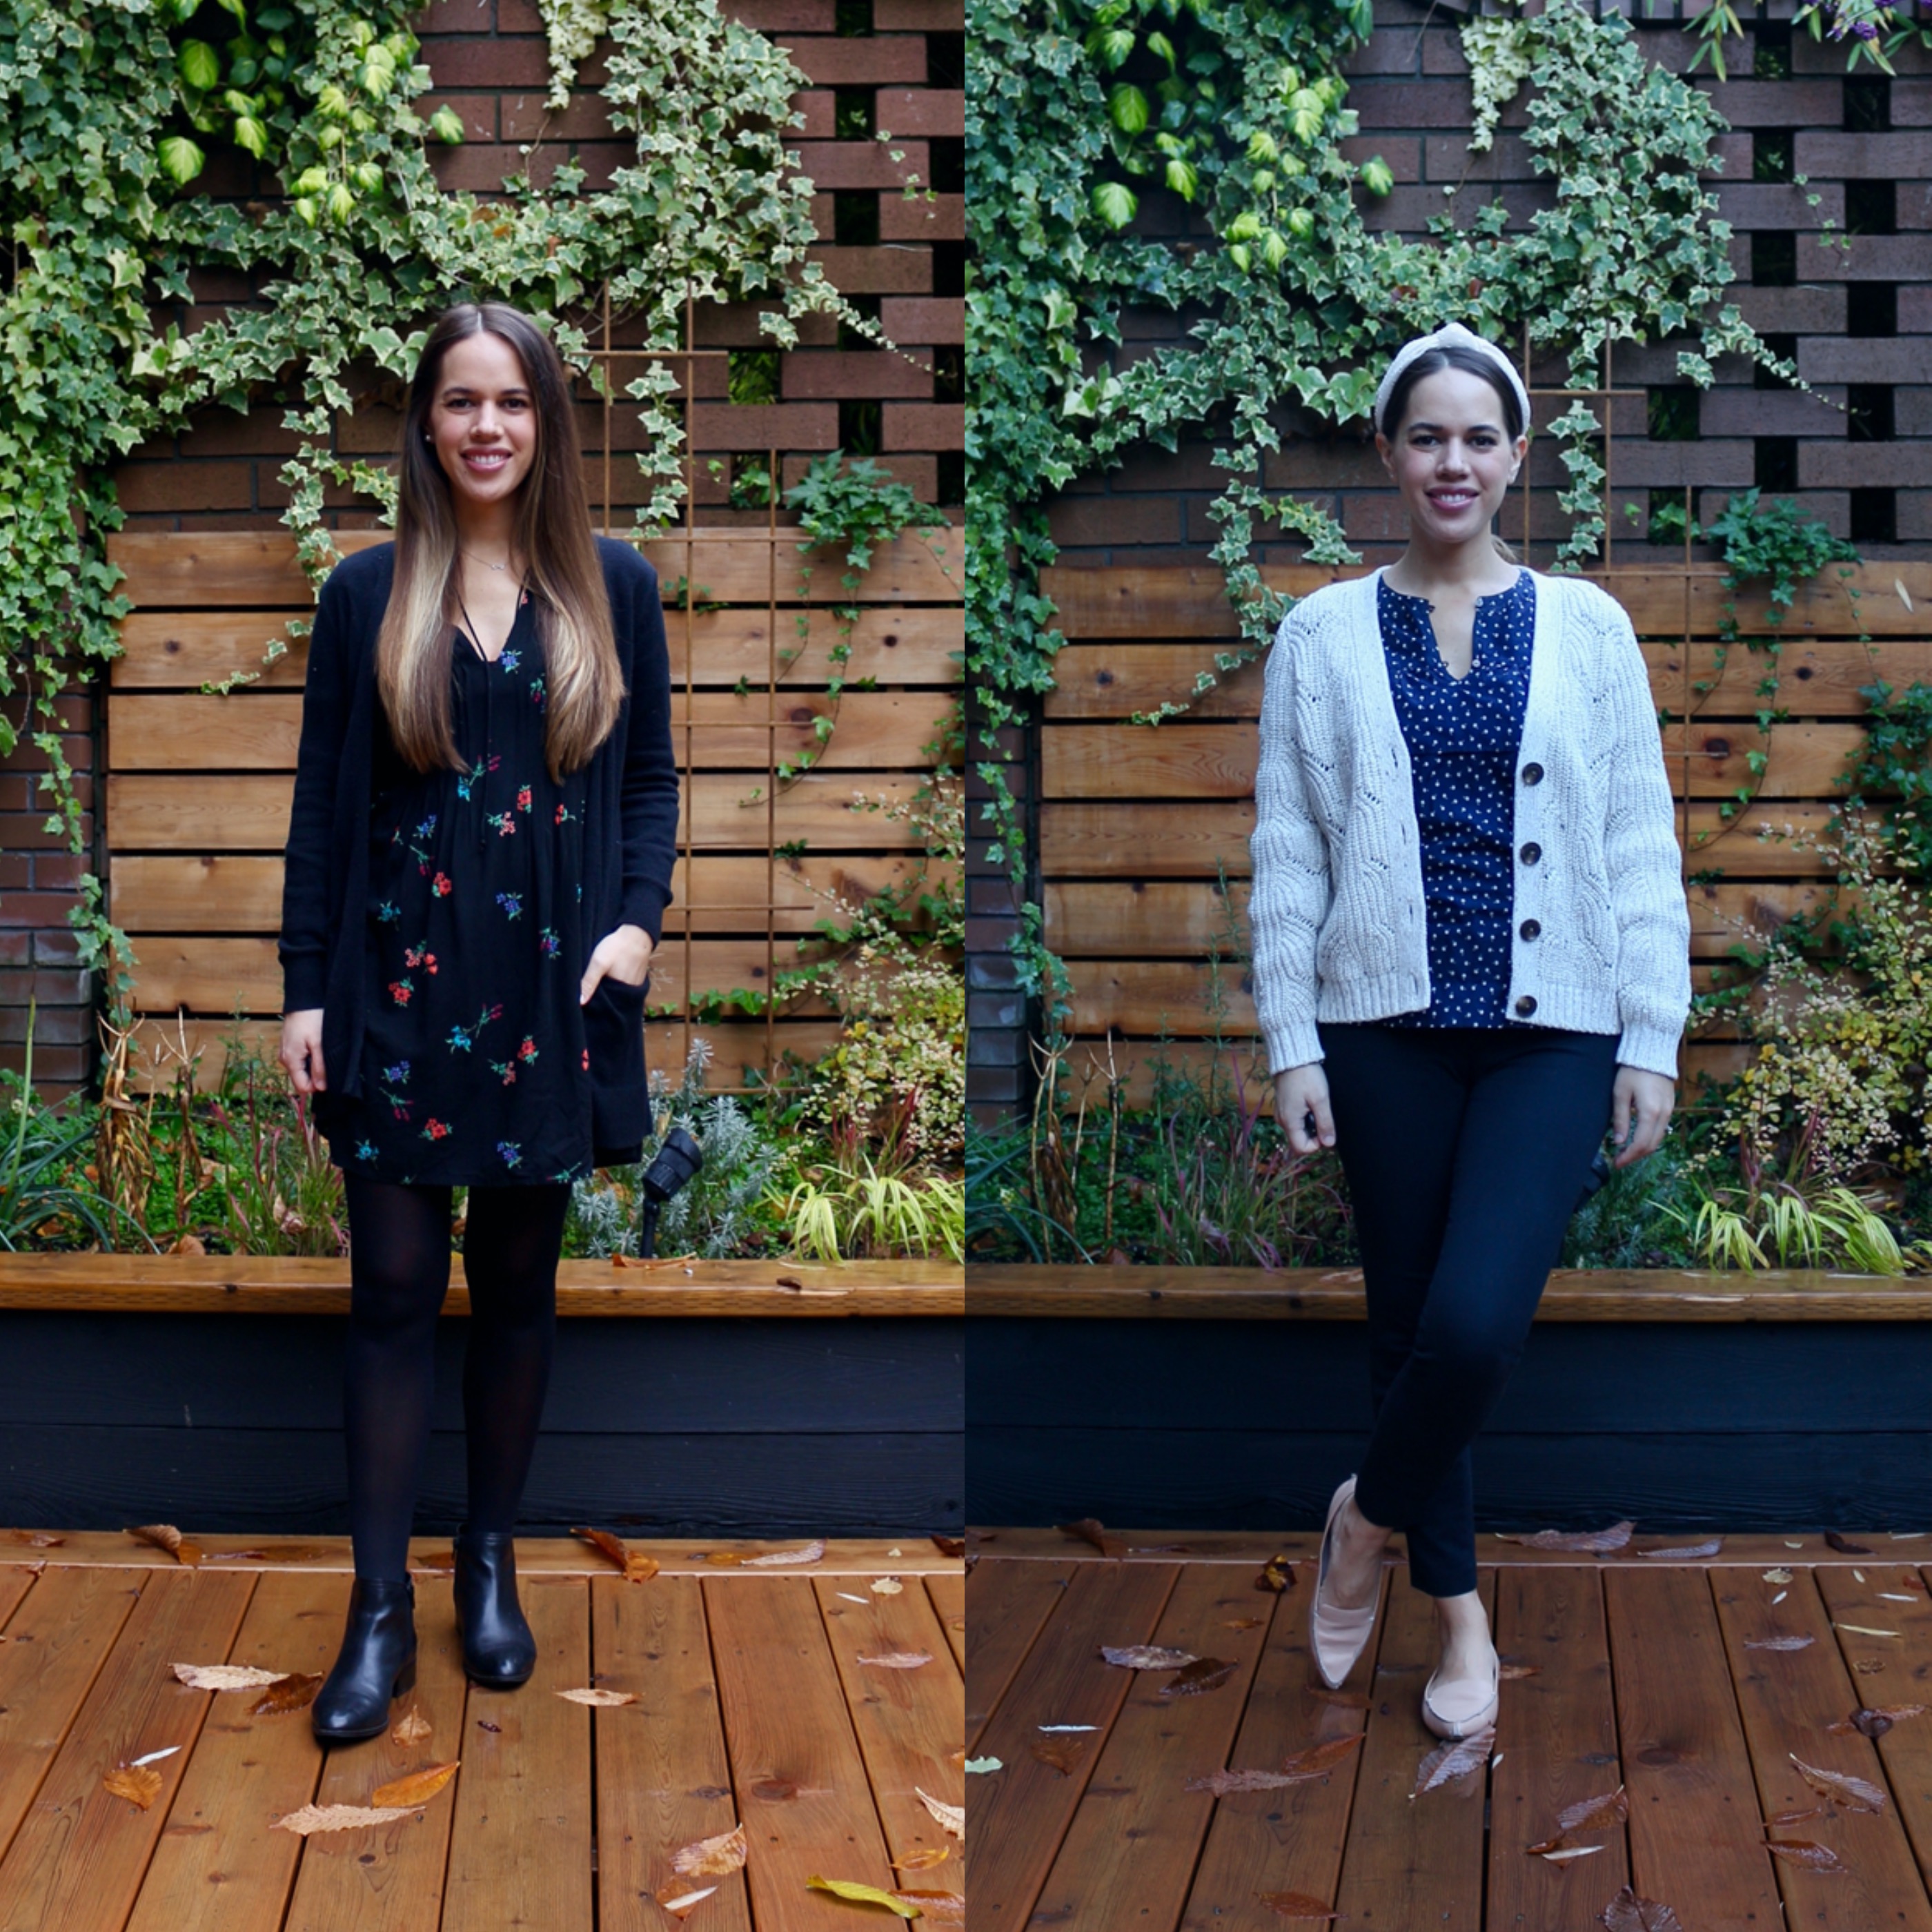 What I Wore: November Week One  How to wear leggings, Business casual  outfits, 2015 outfits